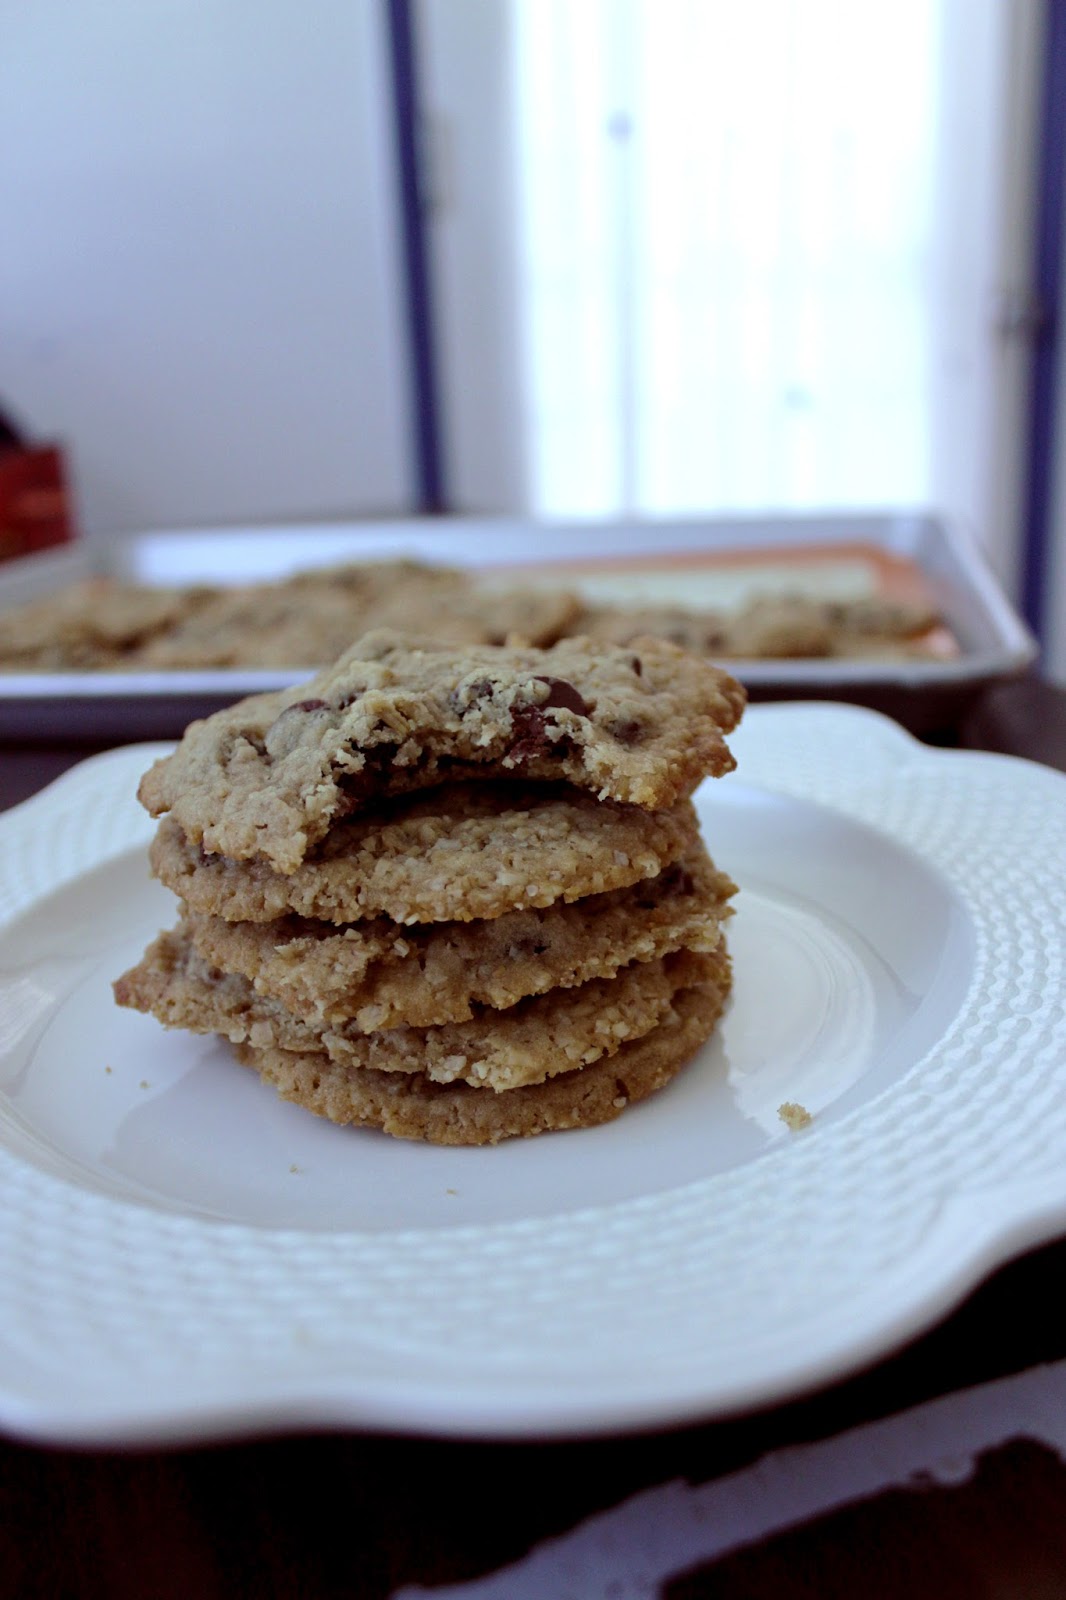 Egg-Less Oatmeal Chocolate Chip Cookies by freshfromthe.com